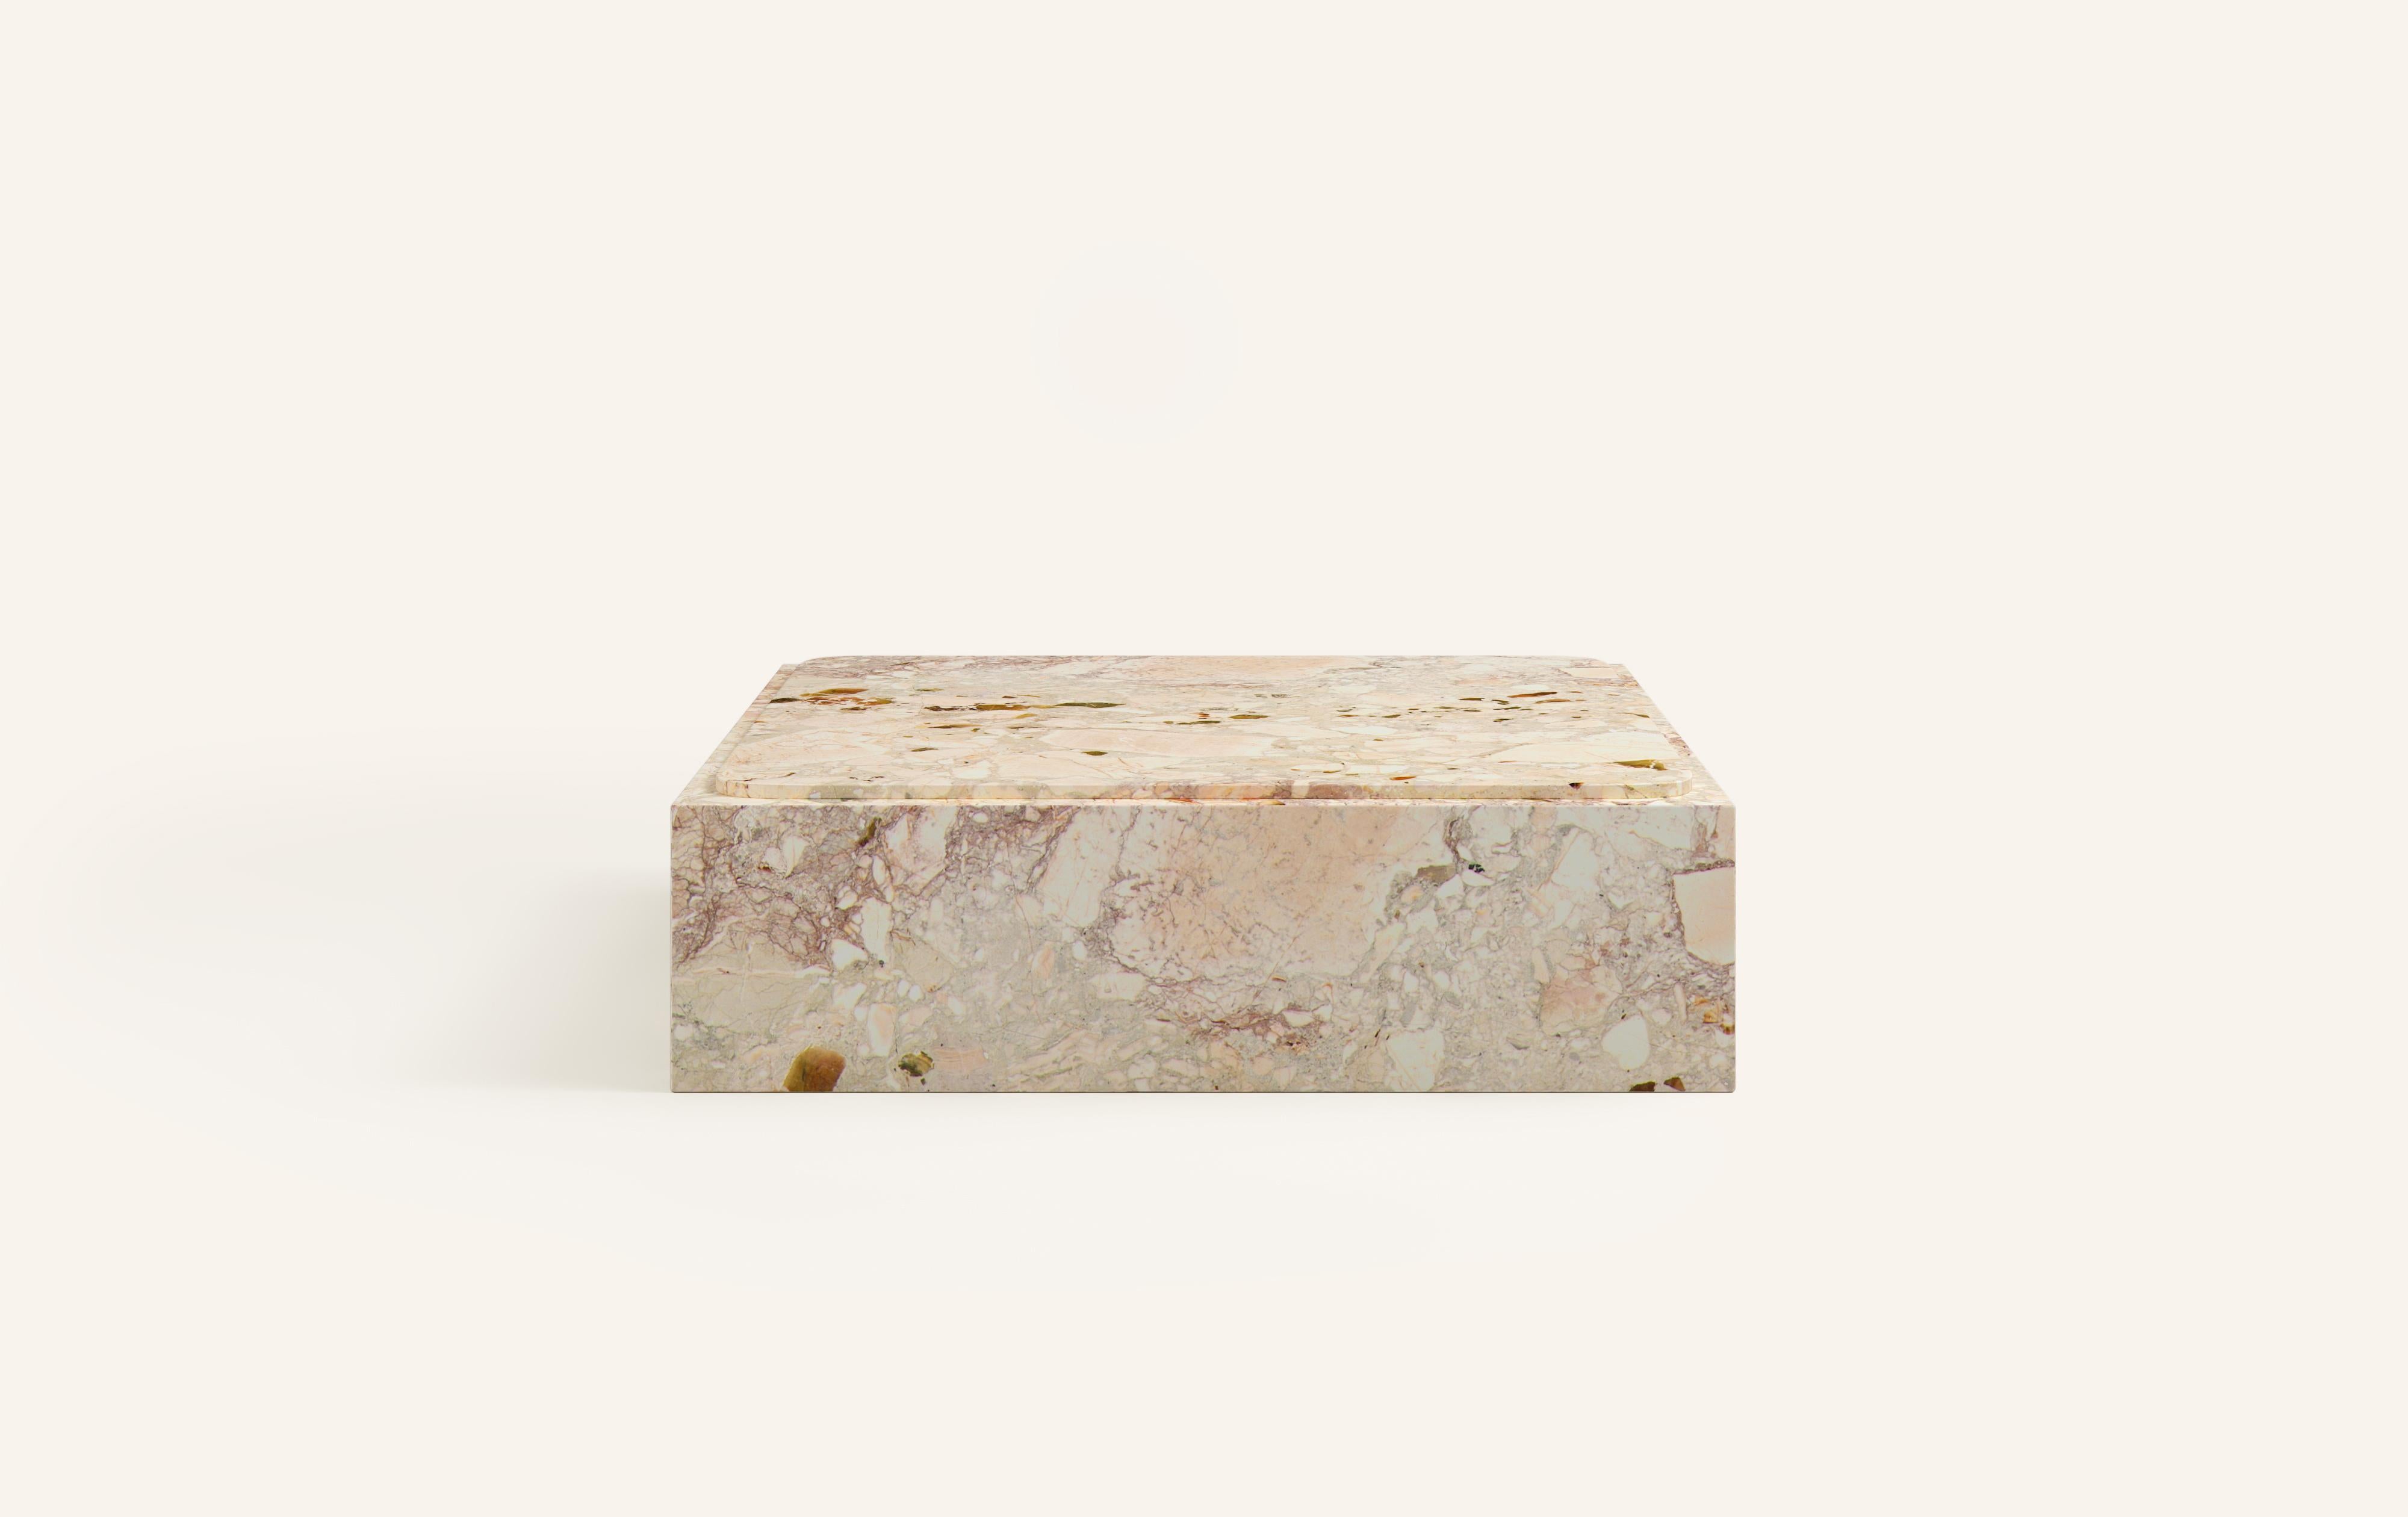 MONOLITHIC FORMS SOFTENED BY GENTLE EDGES. WITH ITS BOLD MARBLE PATTERNS CUBO IS AS VERSATILE AS IT IS STRIKING.

DIMENSIONS:
48”L x 48”W x 13”H: 
- 3/4